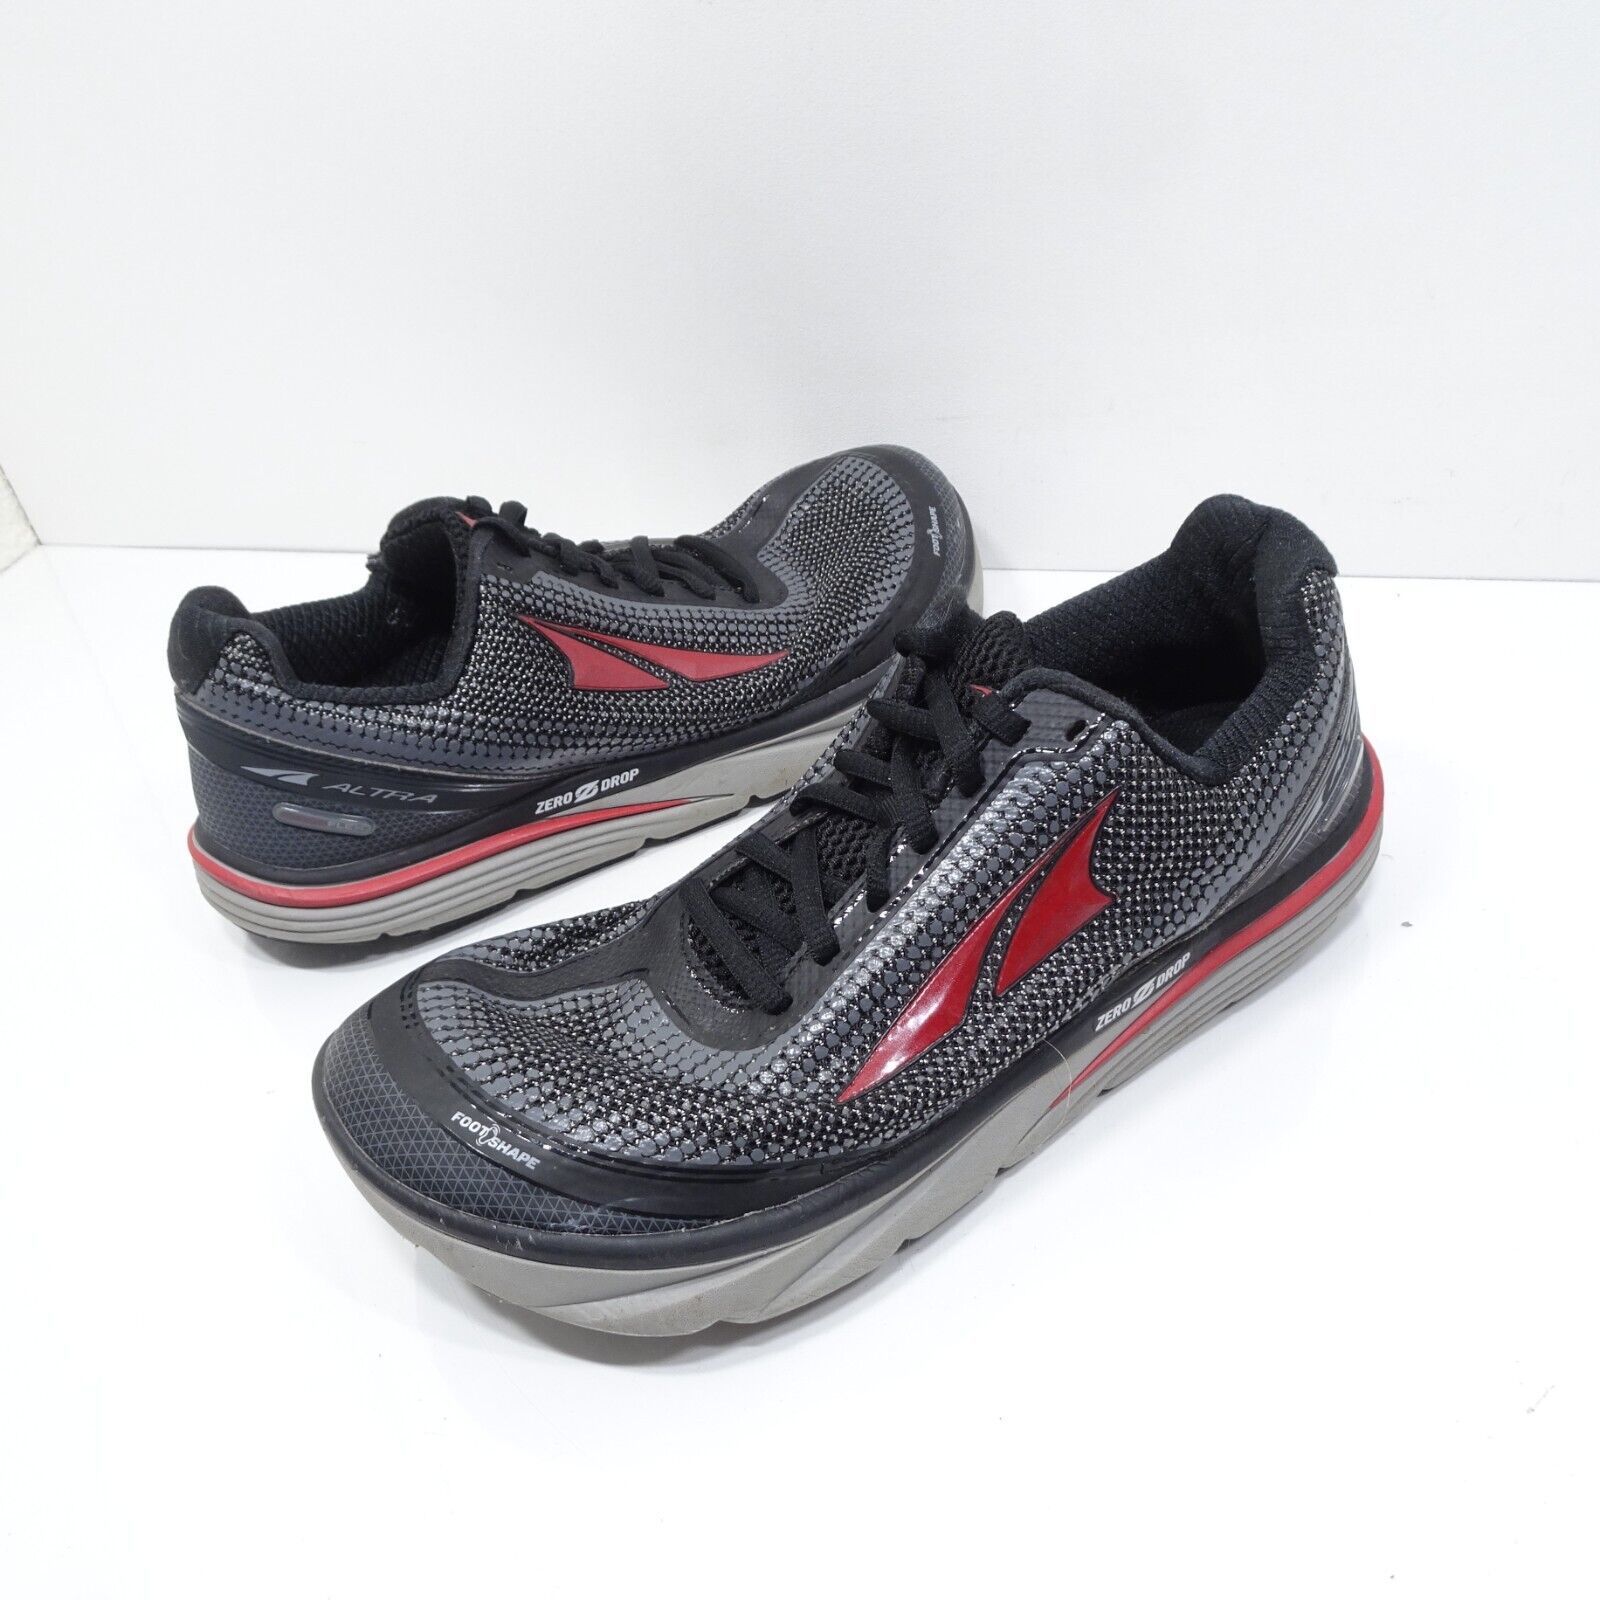 Primary image for Altra Torin 3 Men's Red Black Gray Running Walking Shoes Size 9 Sneakers Shoes